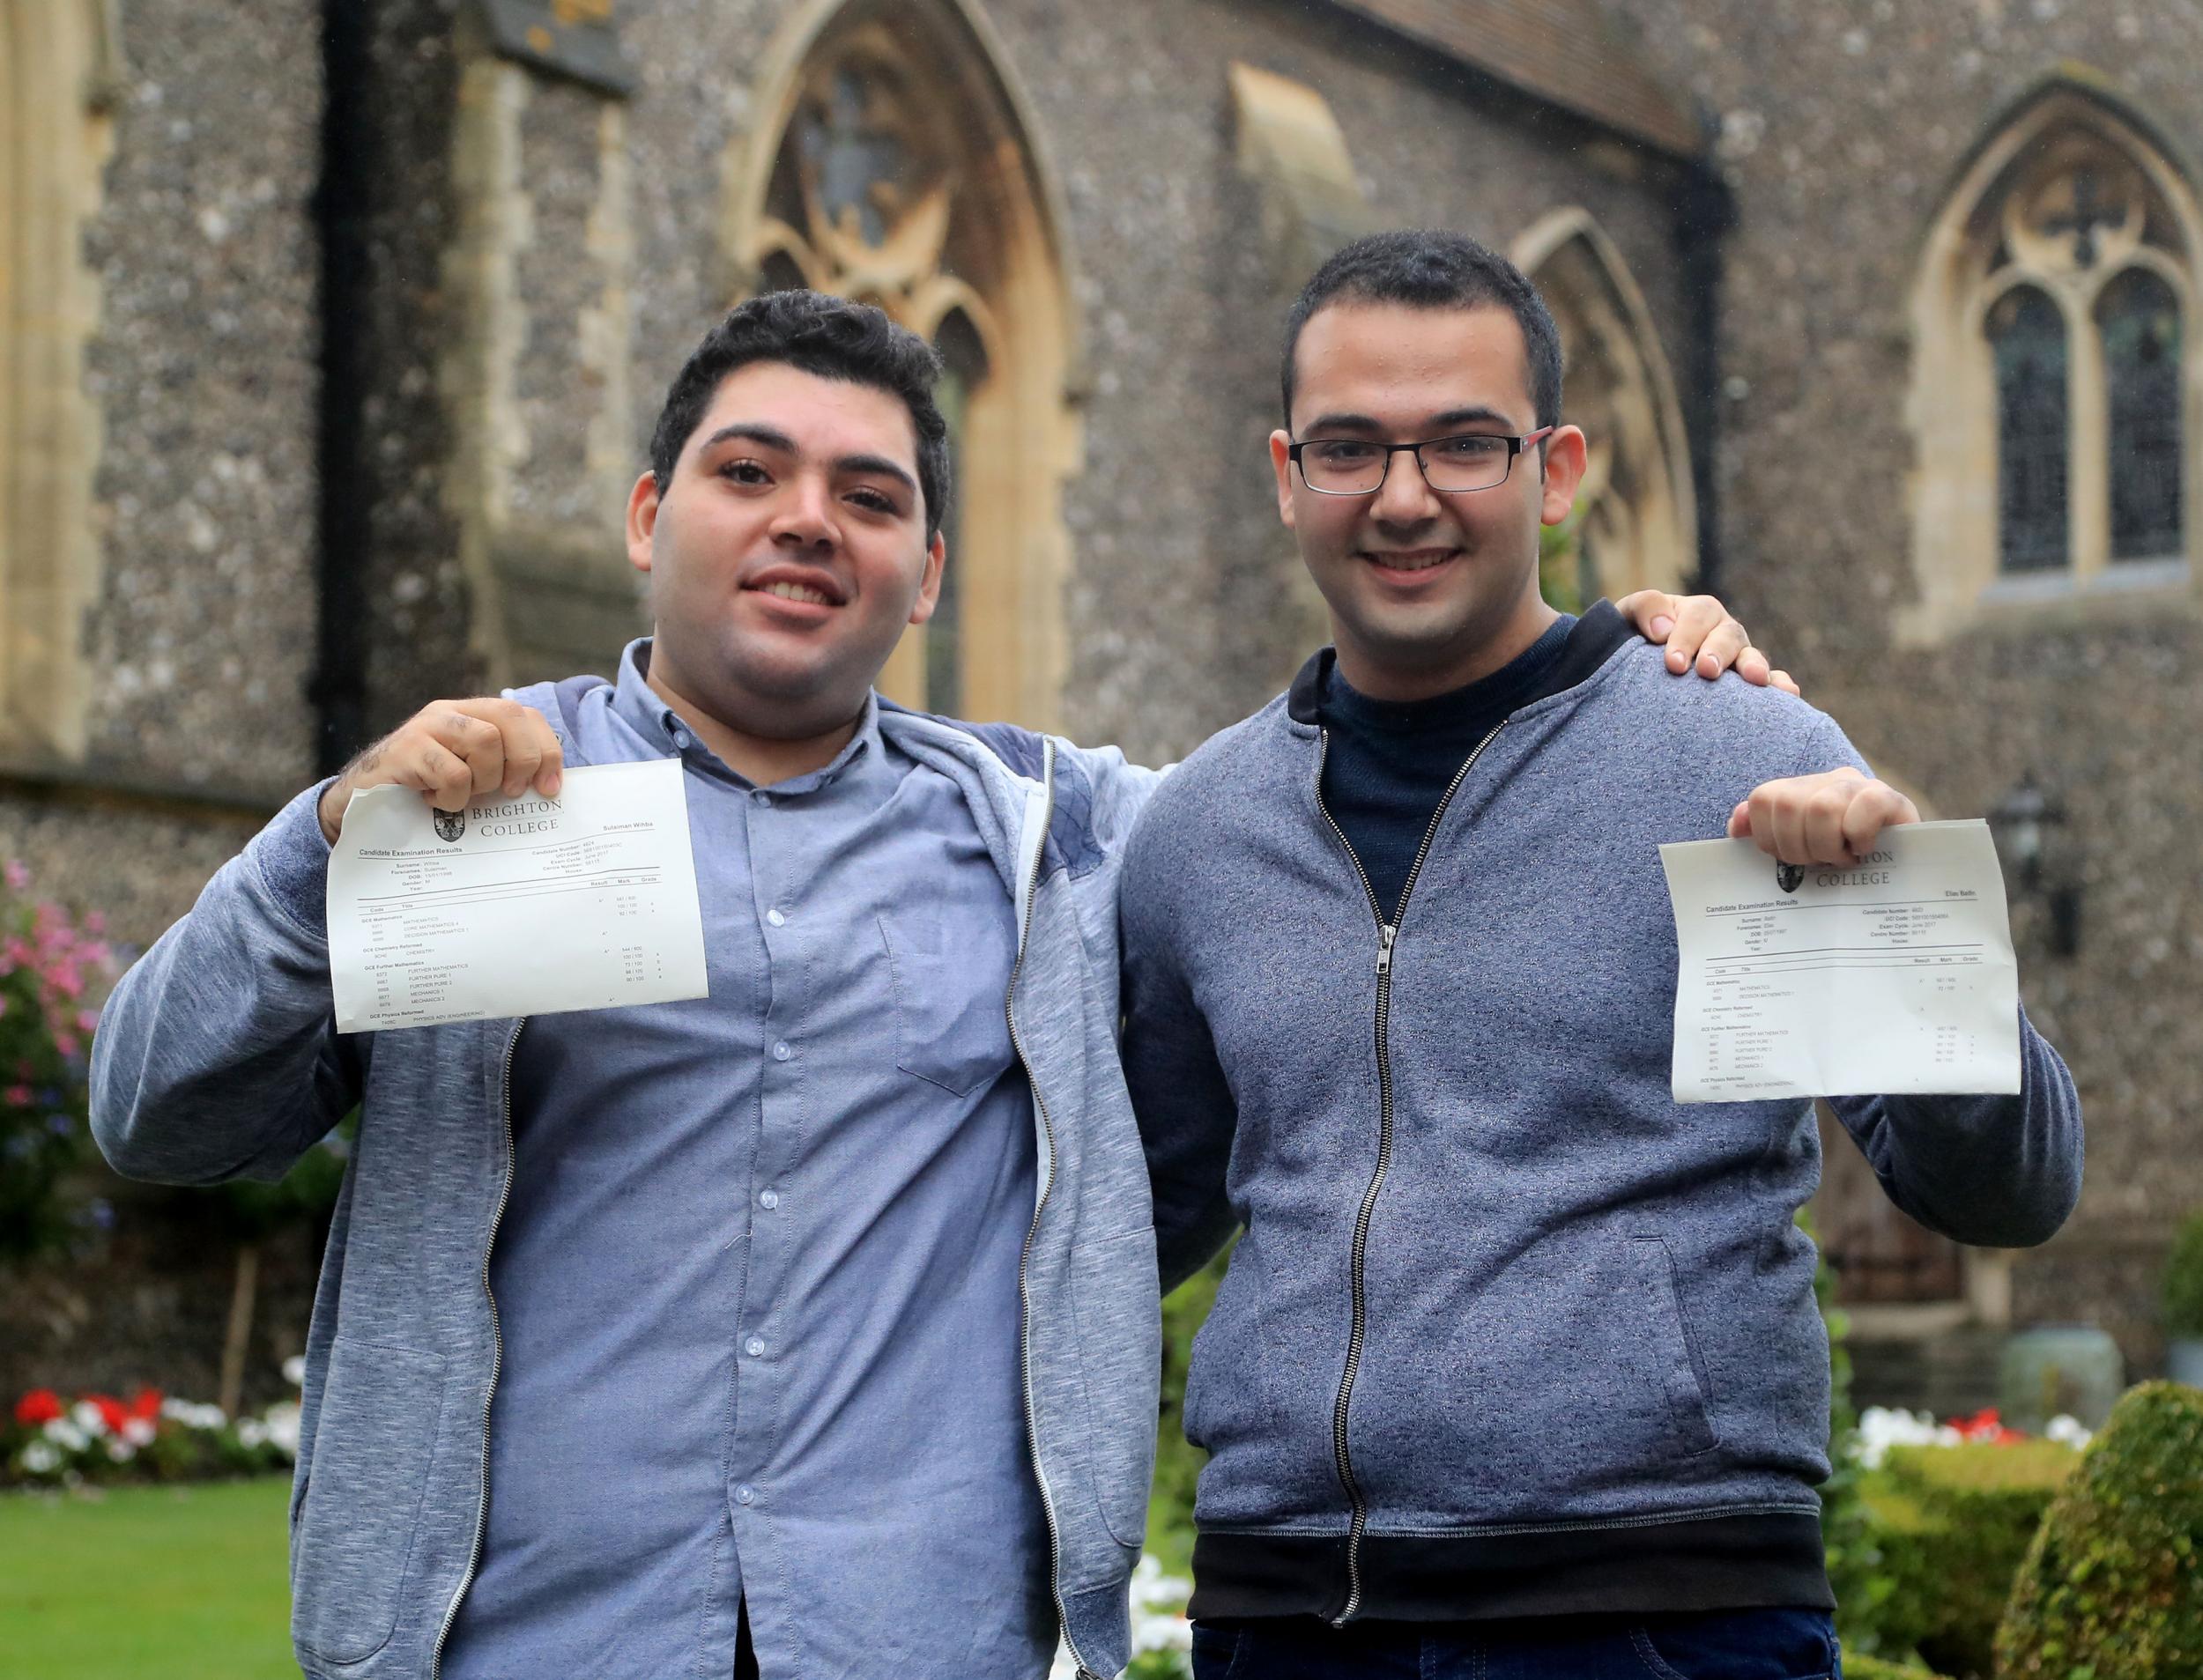 Syrian refugees Sulaiman Wihba, left, and Elias Badin after collecting their A-level results at Brighton College